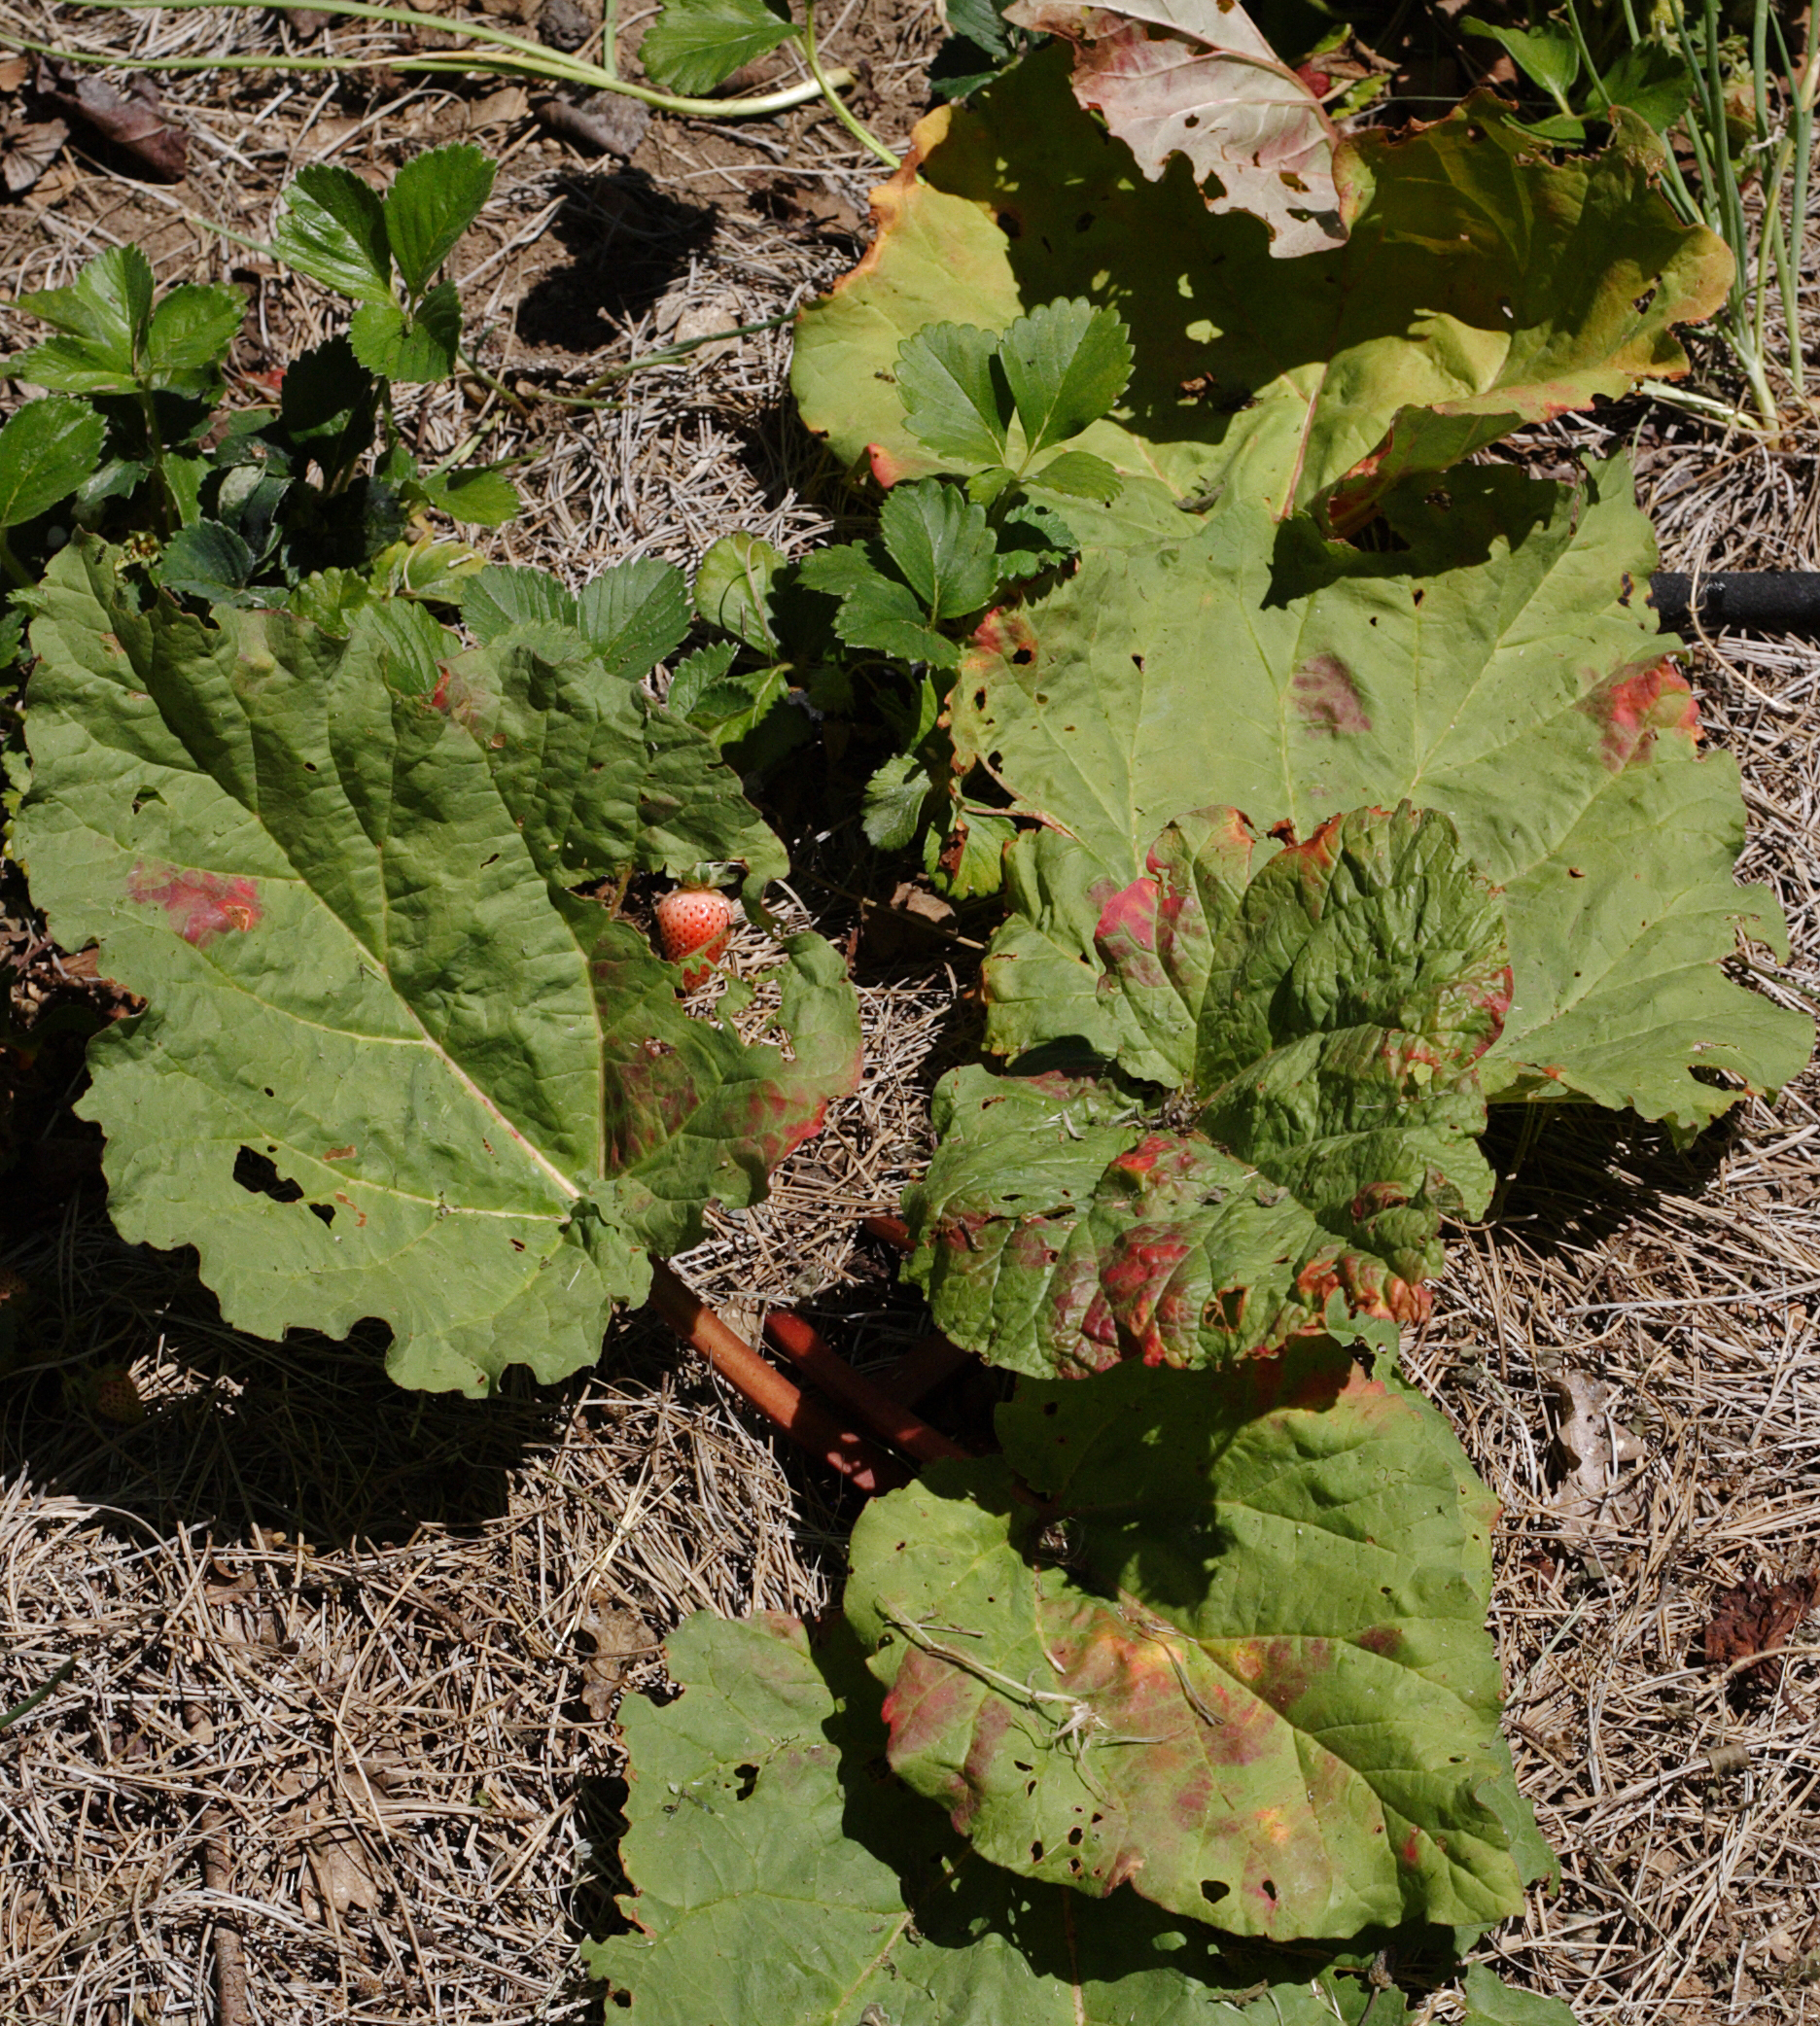 Why Doesn't my Rhubarb Turn Red